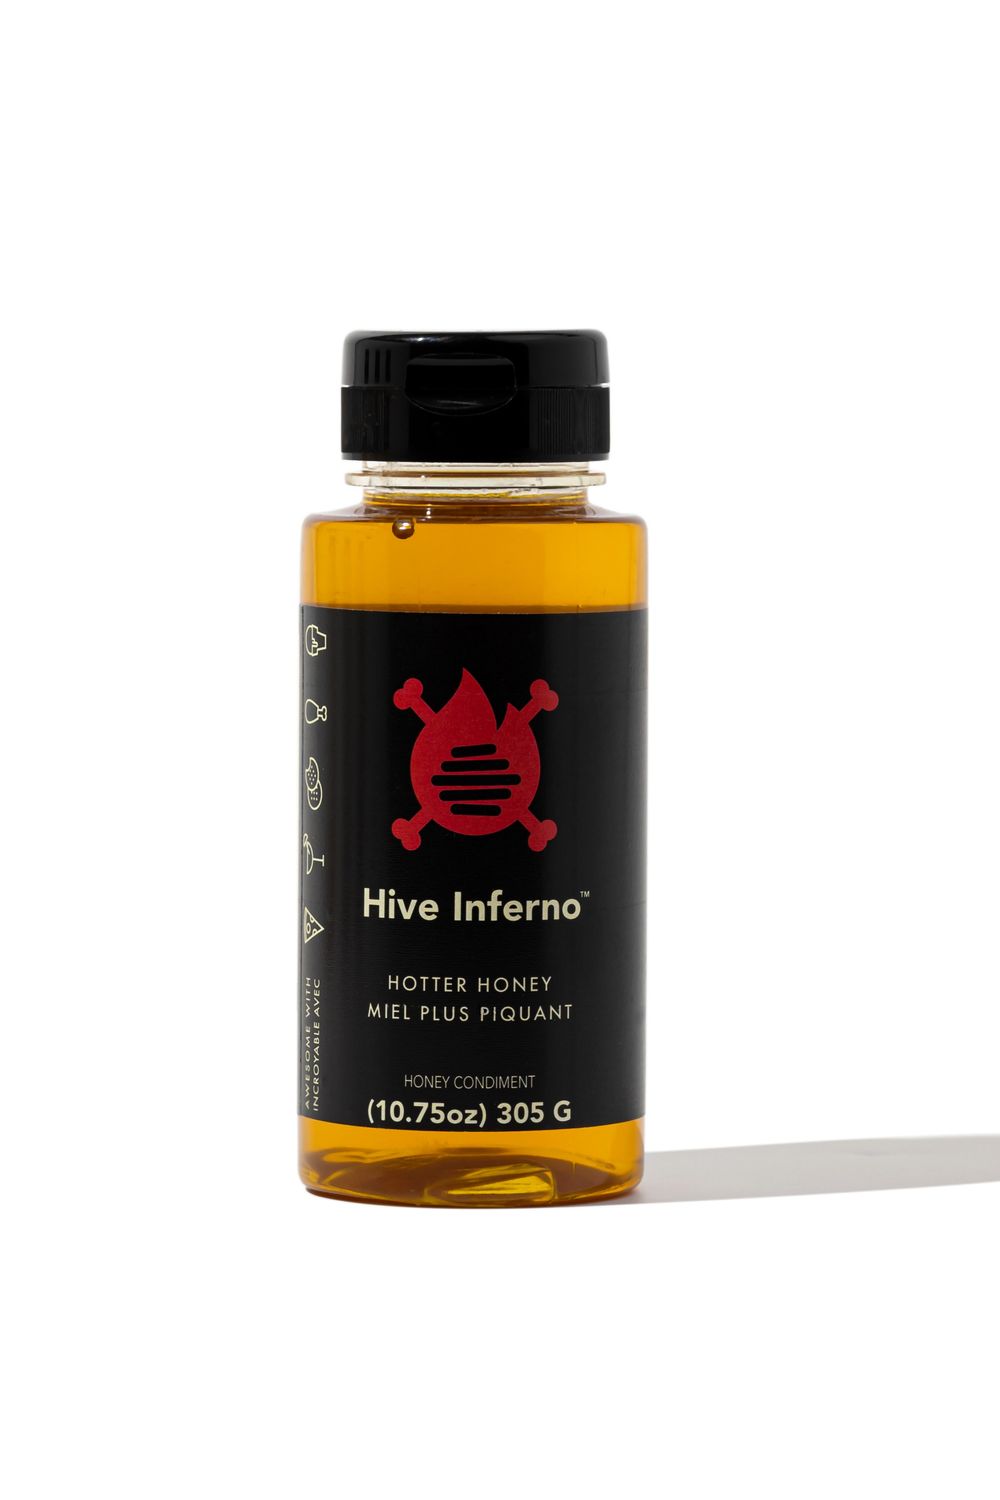 Hive Inferno